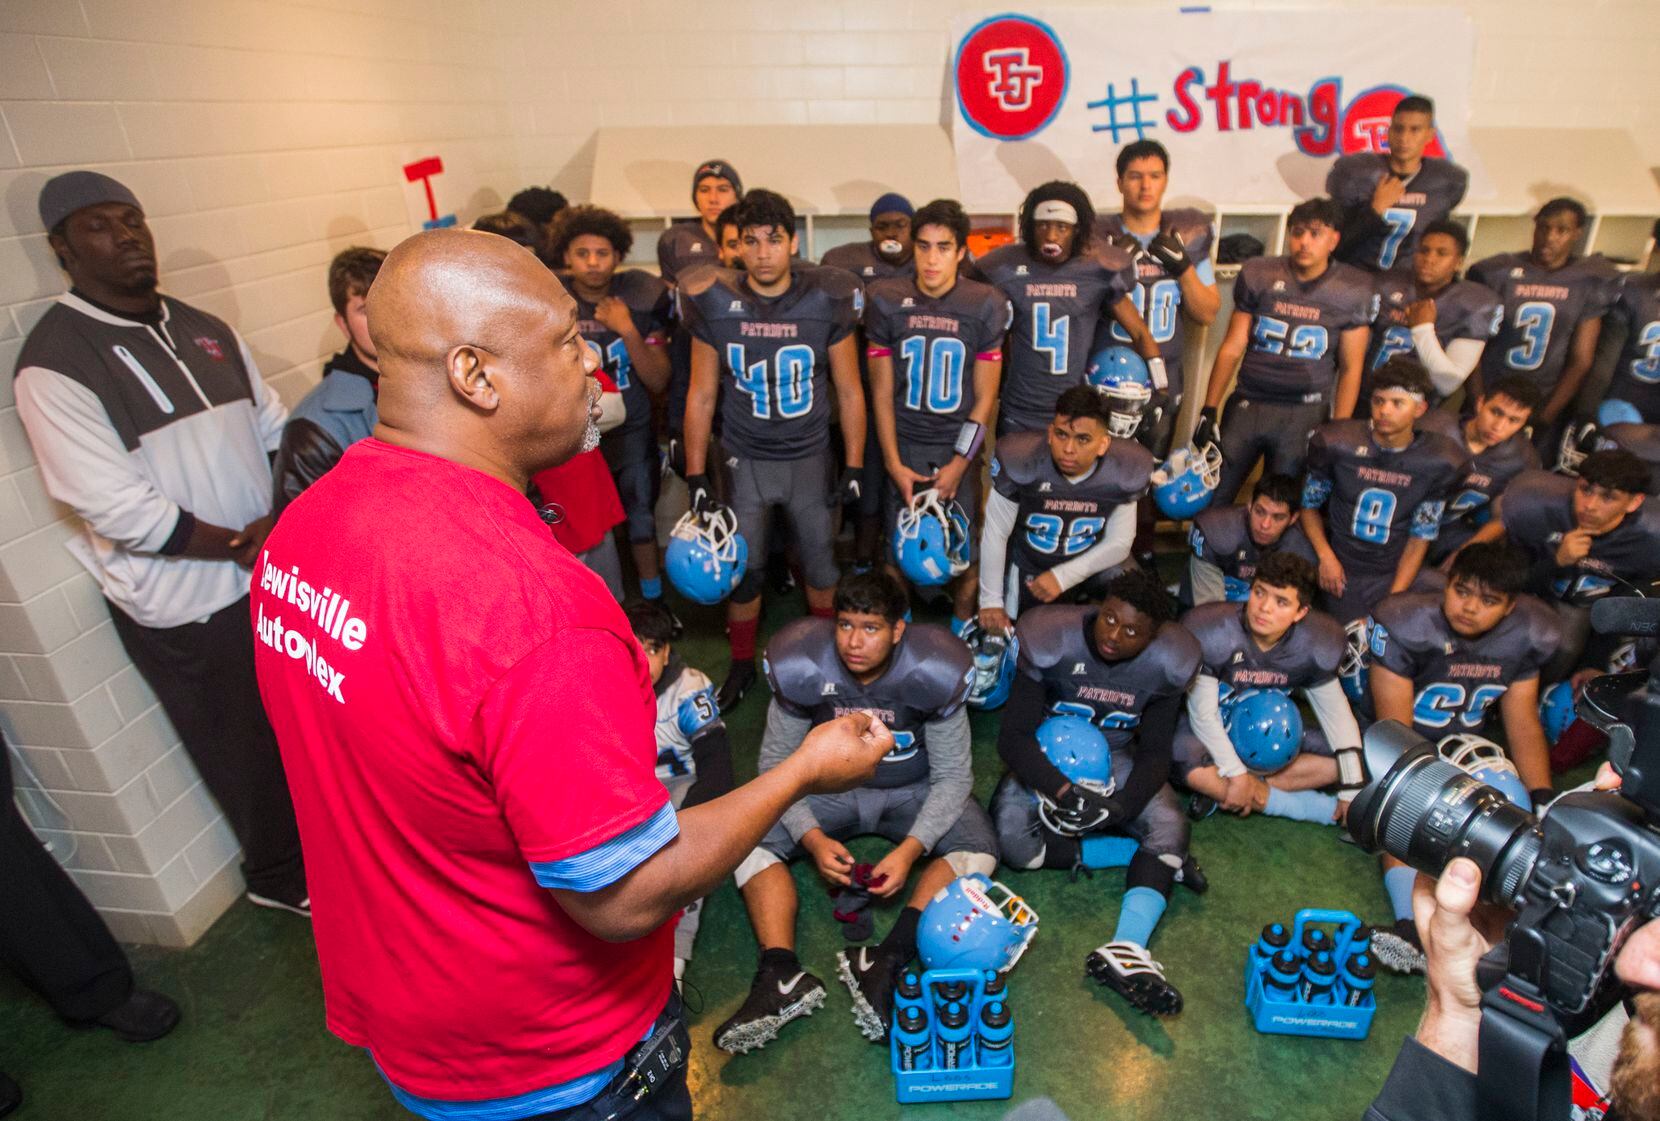 Former Cowboy Charles Haley talks with Thomas Jefferson High School football players in the locker room before they took on Spruce High on Saturday at Loos Stadium in Addison.